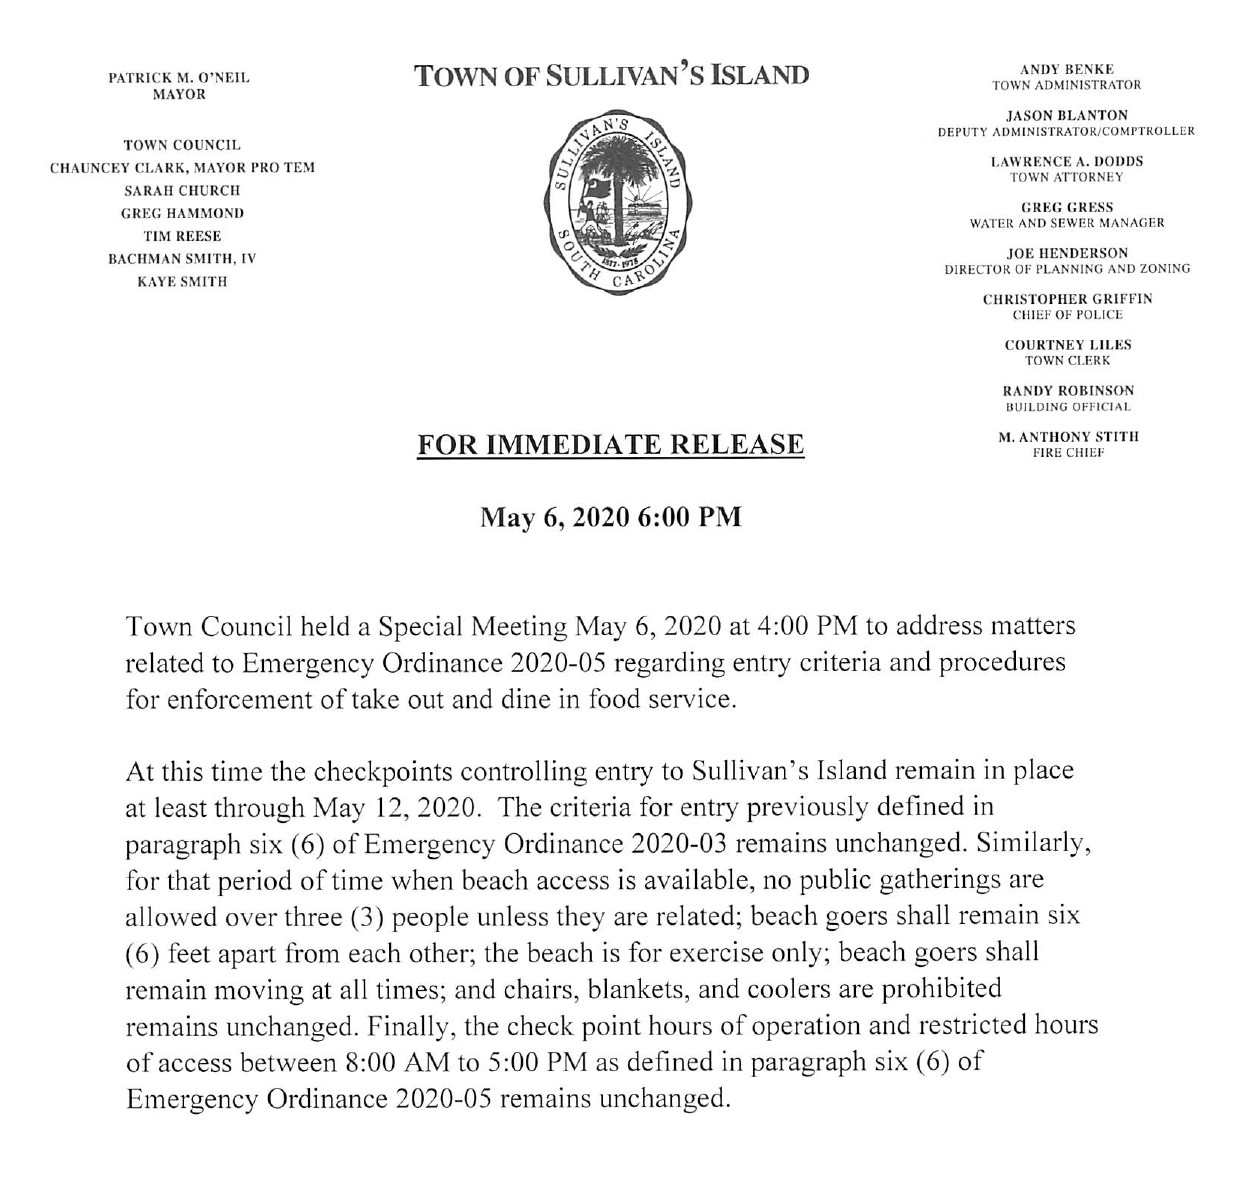 PRESS RELEASE MAY 6, 2020